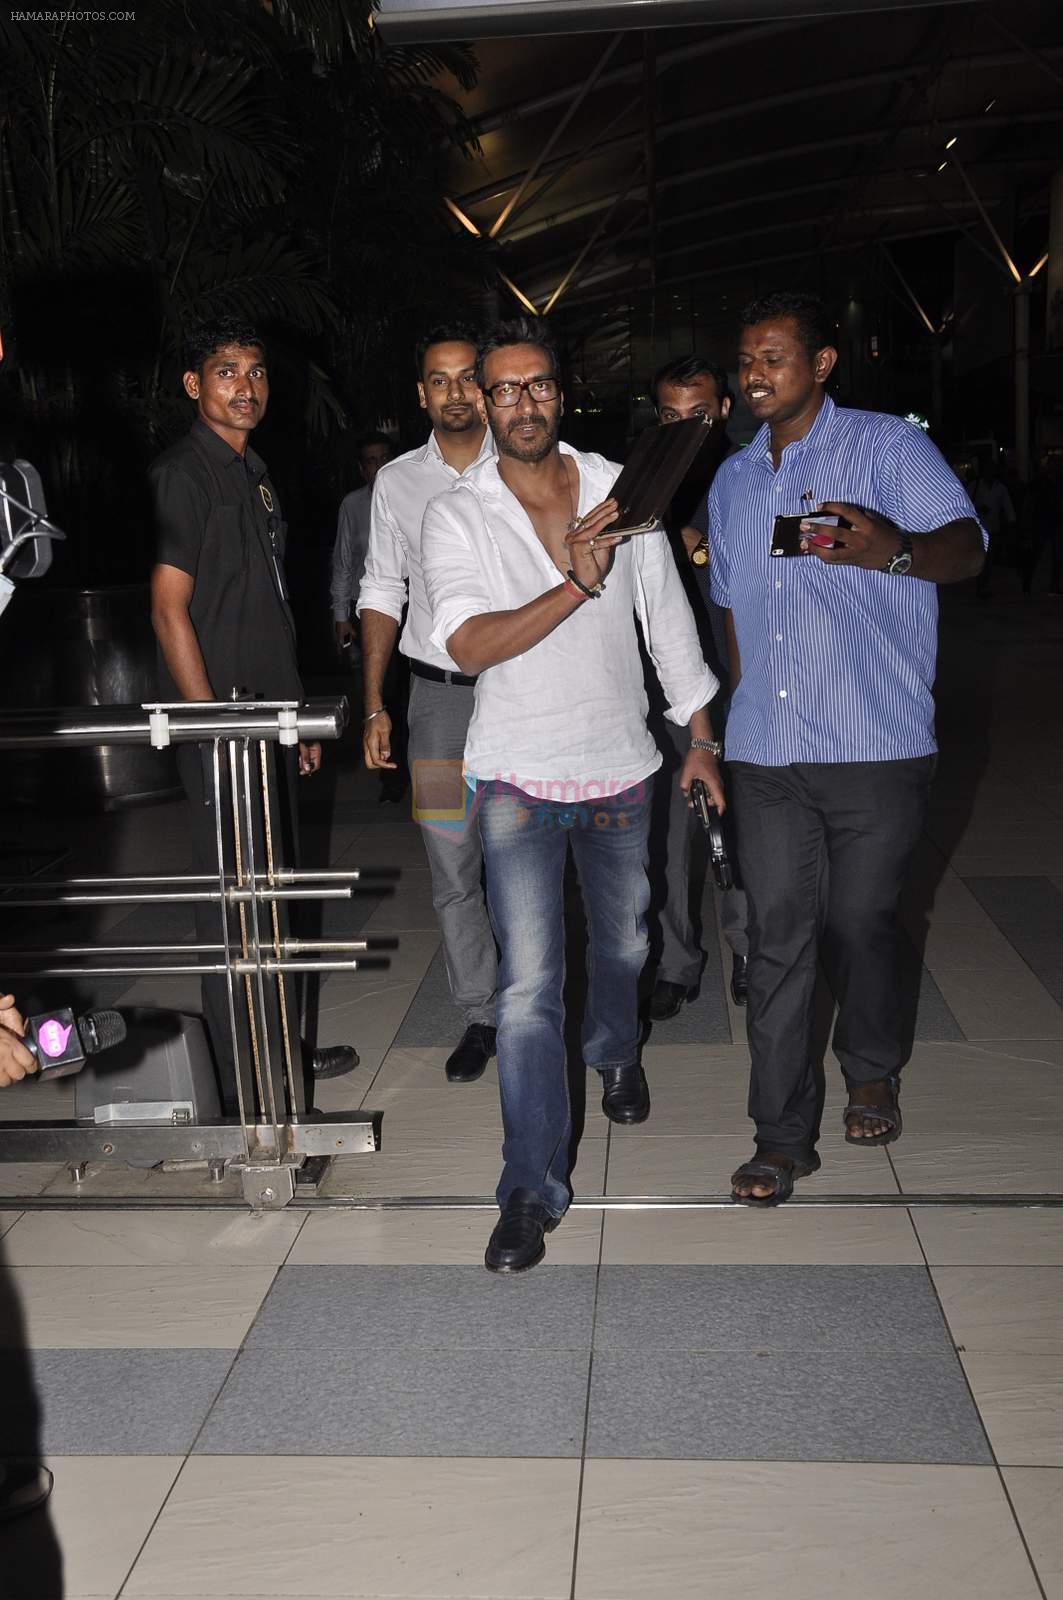 Ajay Devgan snapped at airport on 19th Oct 2015